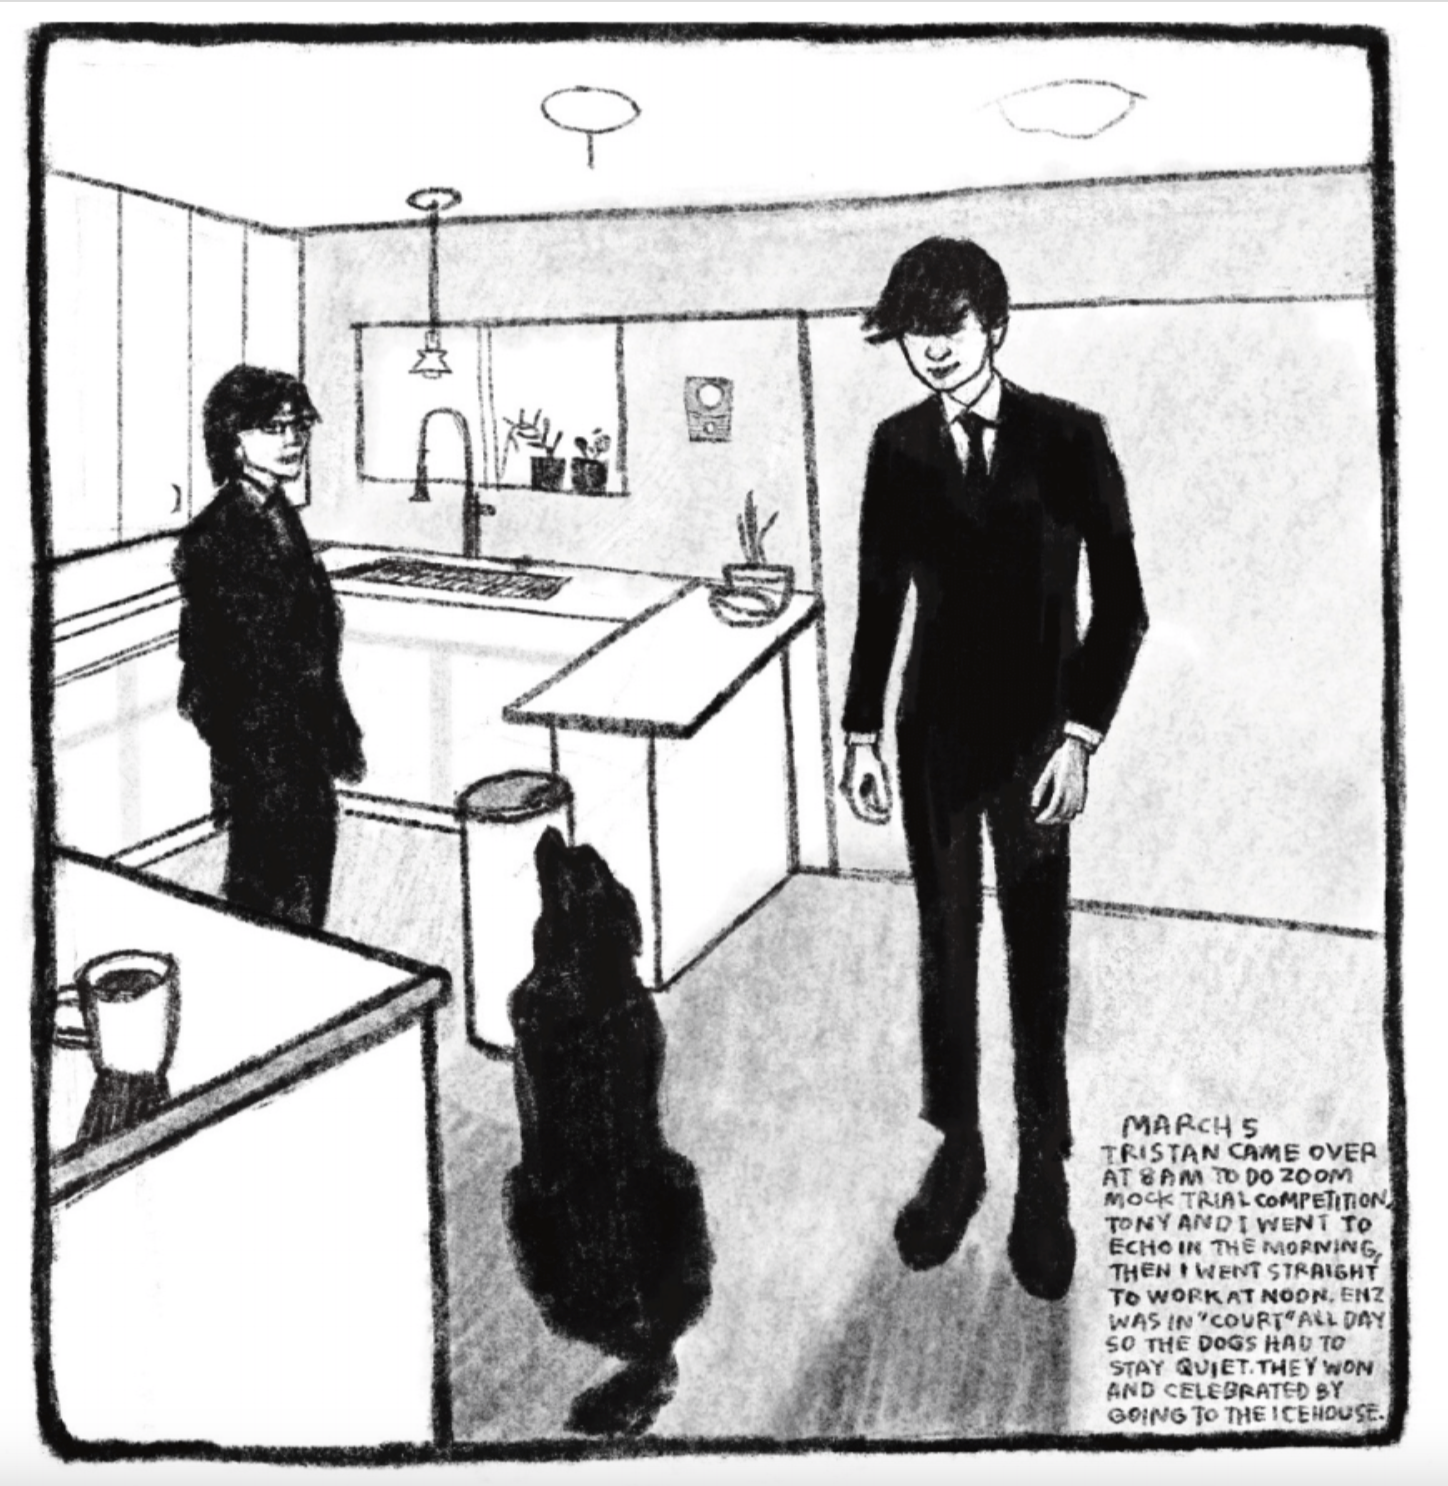 Panel 5
Two young people in suits stand in a kitchen. A dog sits politely, looking up at one (Tristan).
Caption reads: "MARCH 5
TRISTAN CAME OVER AT 8AM TO DO ZOOM MOCK TRIAL COMPETITION. TONY AND I WENT TO ECHO IN THE MORNING, THEN I WENT STRAIGHT TO WORK AT NOON. ENZ WAS IN 'COURT' ALL DAY SO THE DOGS HAD TO STAY QUIET. THEY WON AND CELEBRATED BY GOING TO THE ICEHOUSE."